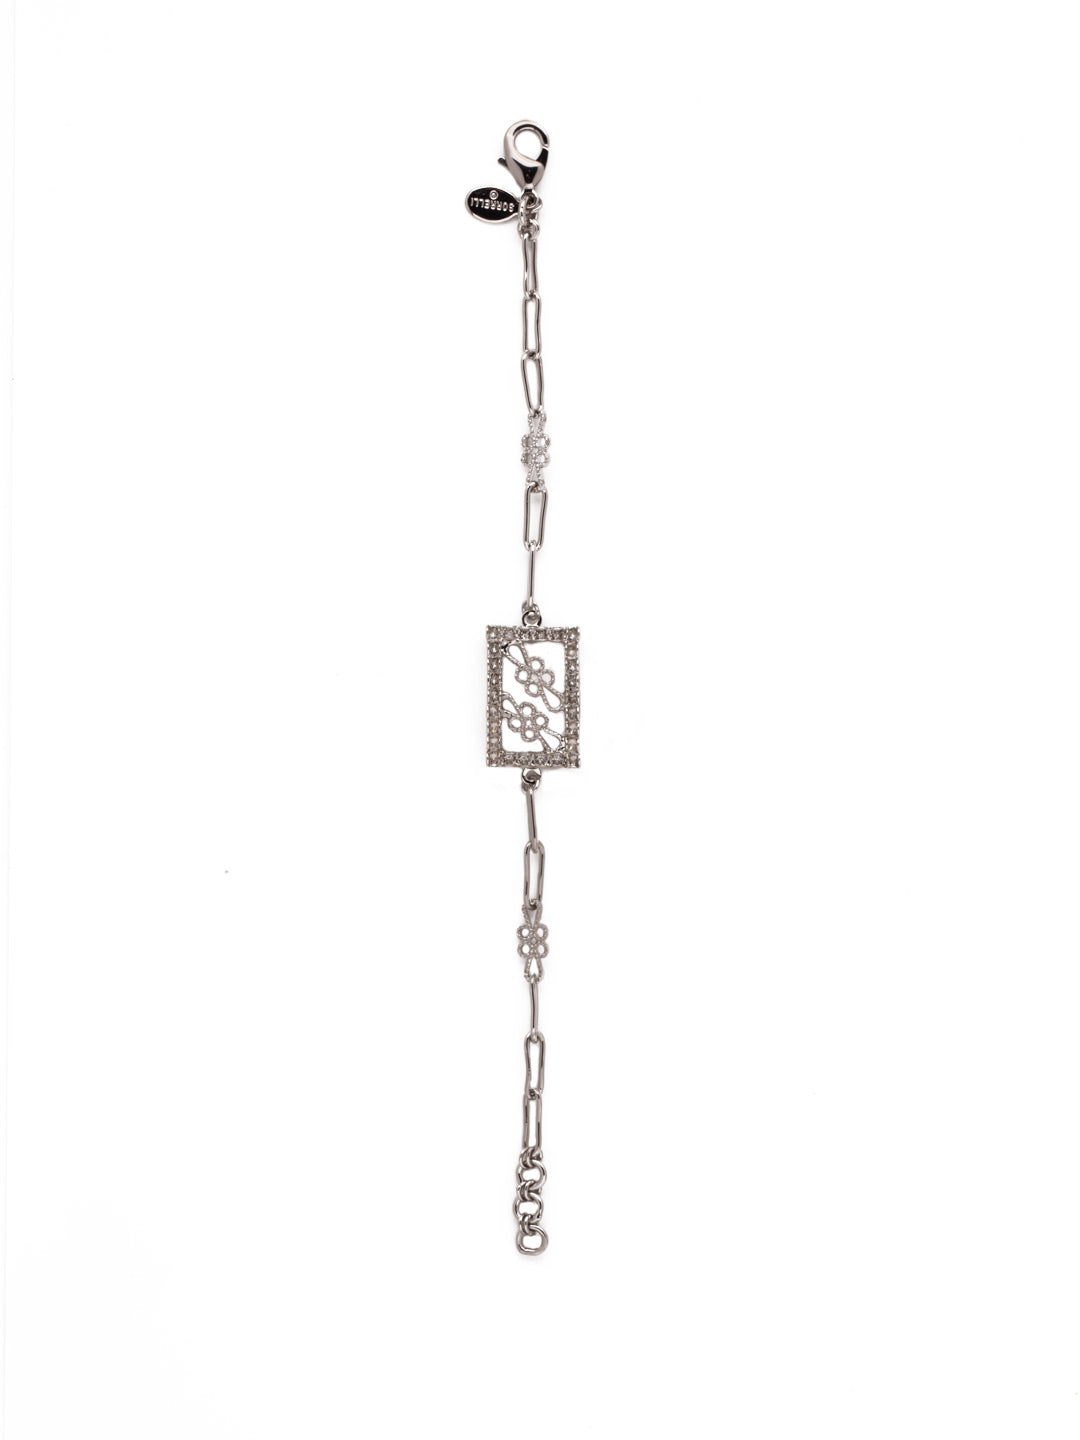 Crissa Tennis Bracelet - BEZ3PDCRY - <p>The Crissa Tennis Bracelet spotlights a delicately detailed rectangle charm on a paperclip chain, secured with a lobster clasp closure. From Sorrelli's Crystal collection in our Palladium finish.</p>